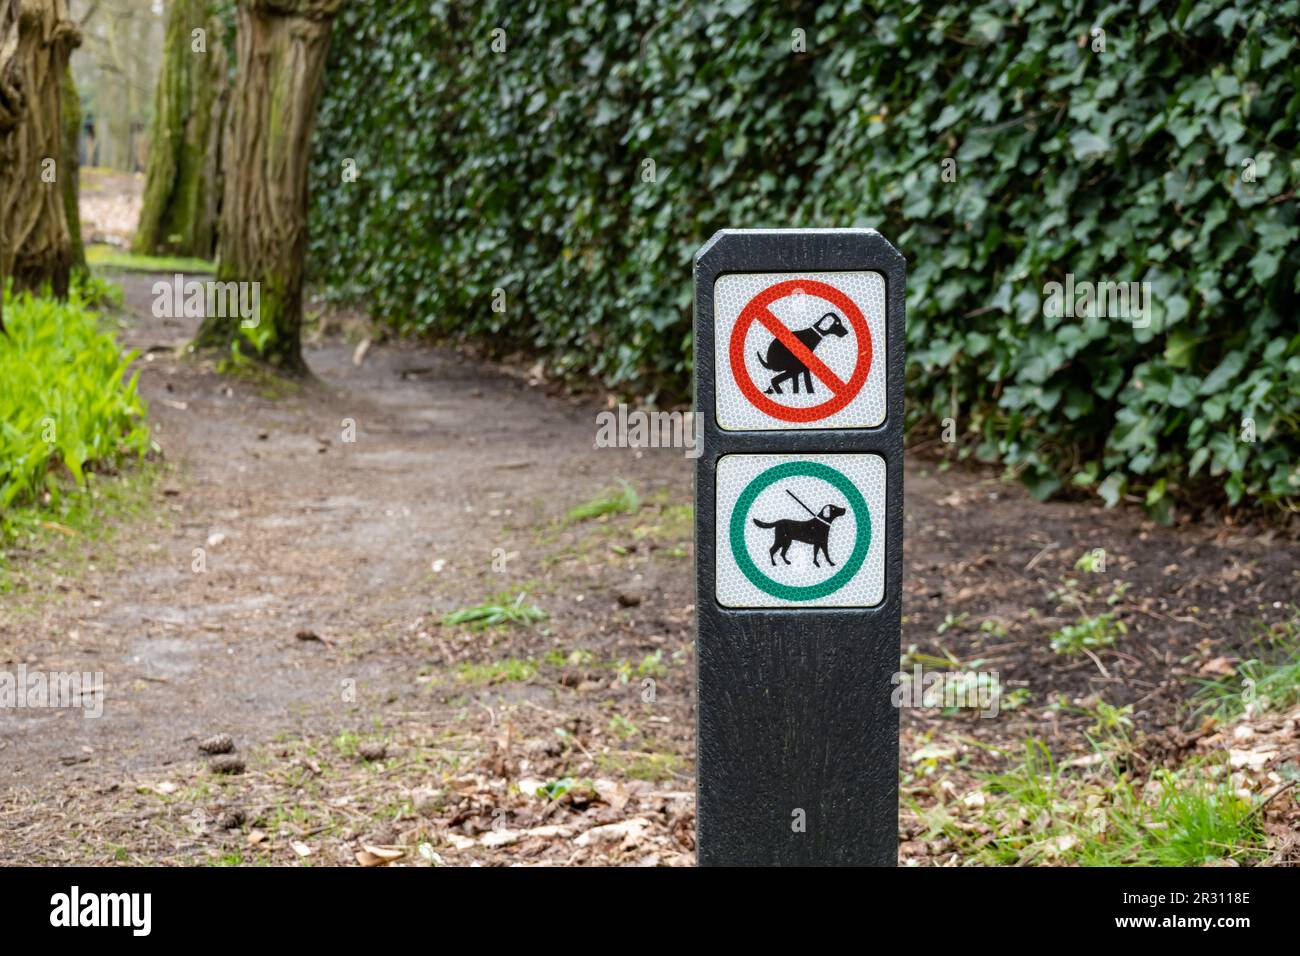 Signpost with pictograms for dogs forbidden to defecate and dogs must be on leash on footpath in woodland, Hilversum, Netherlands Stock Photo